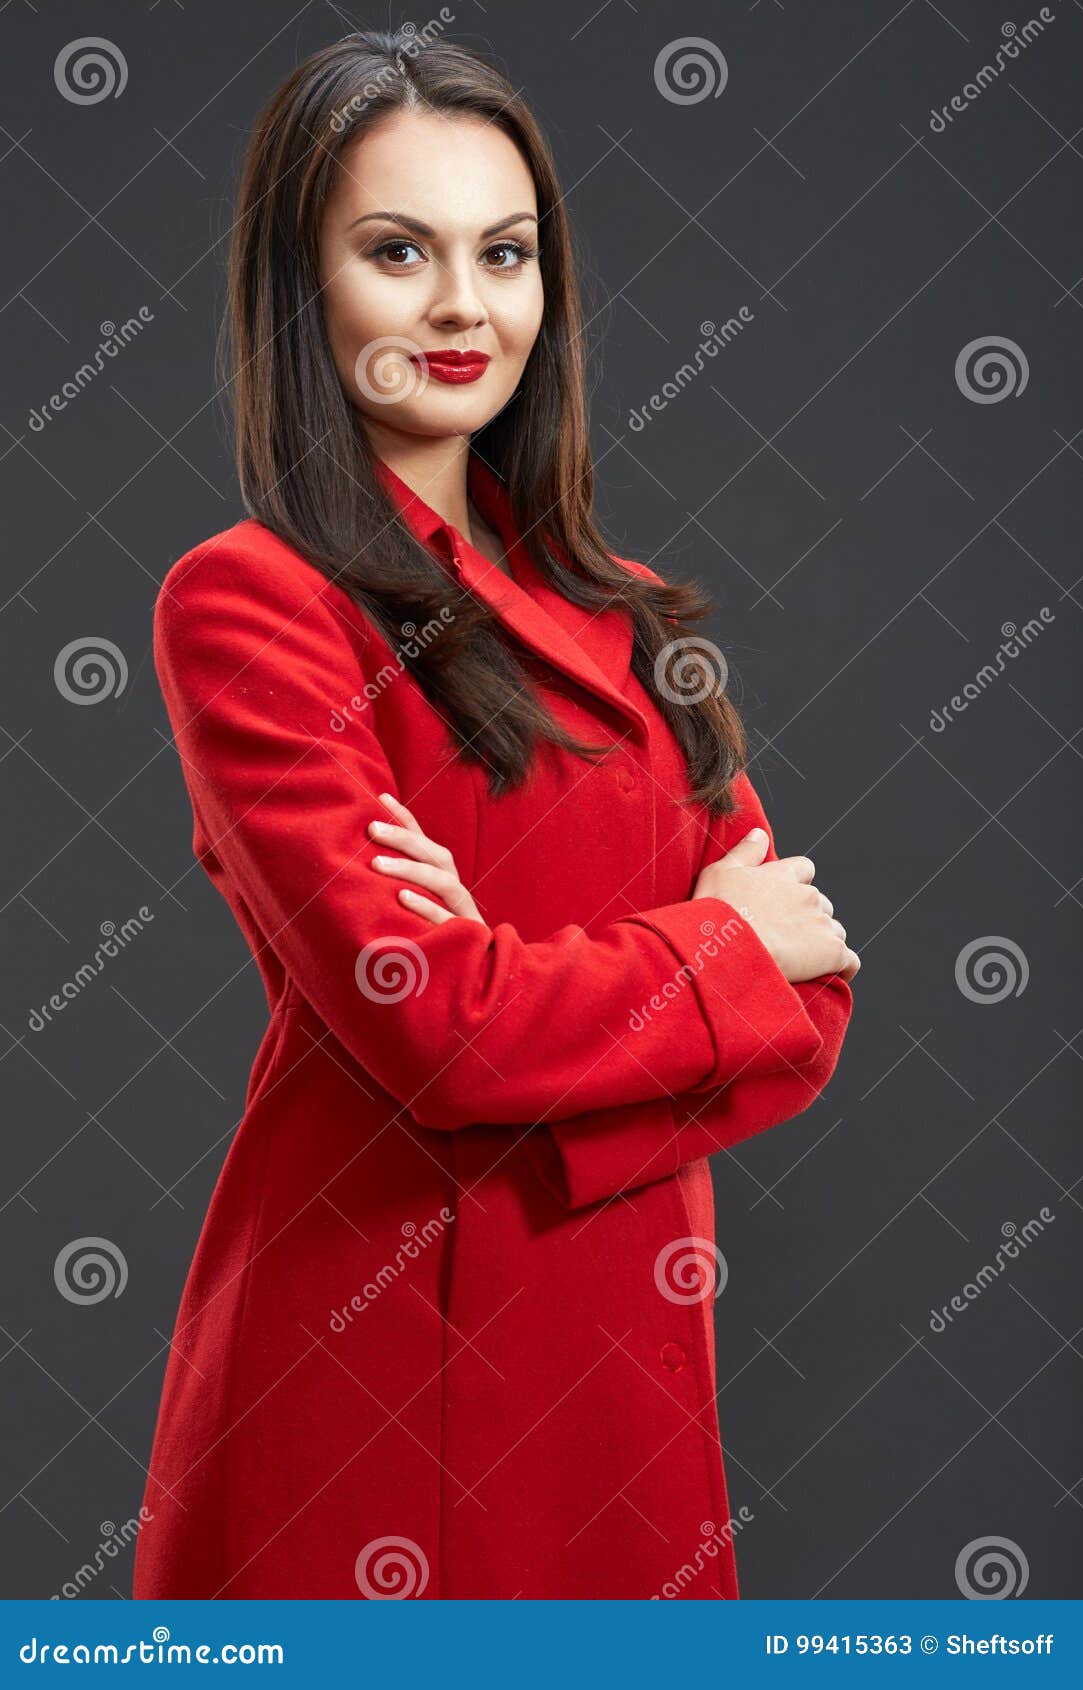 Smiling Woman Dressed in Red Coat Standing with Crossed Arms. Stock ...